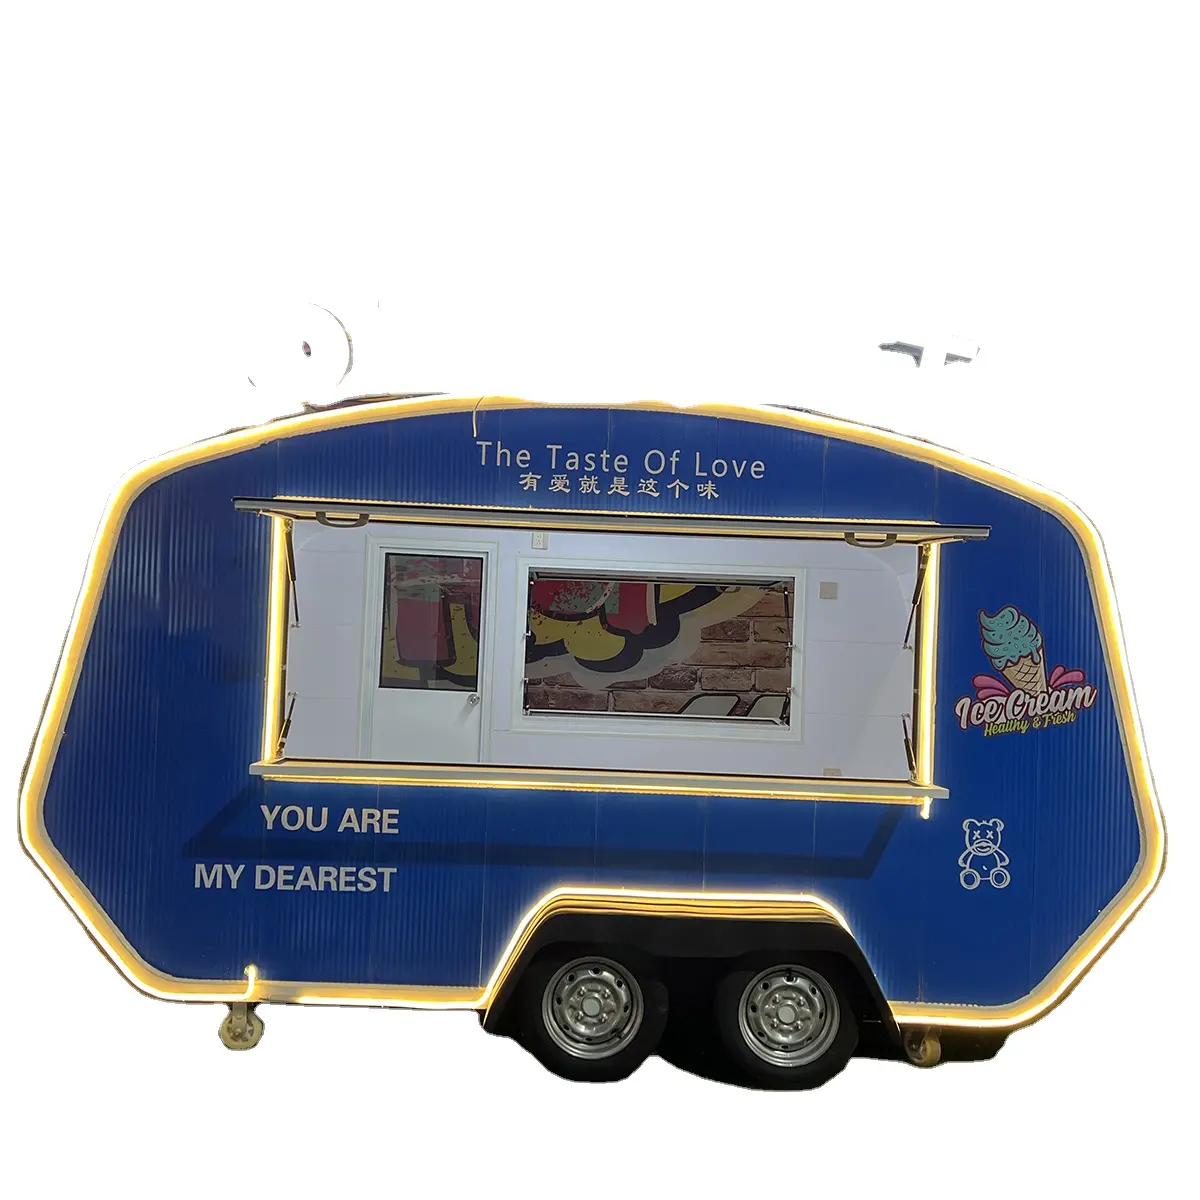 Oucci Mini Van Electric Mobile Nail Salon Truck Food Shop With Dine In For Sale Australia